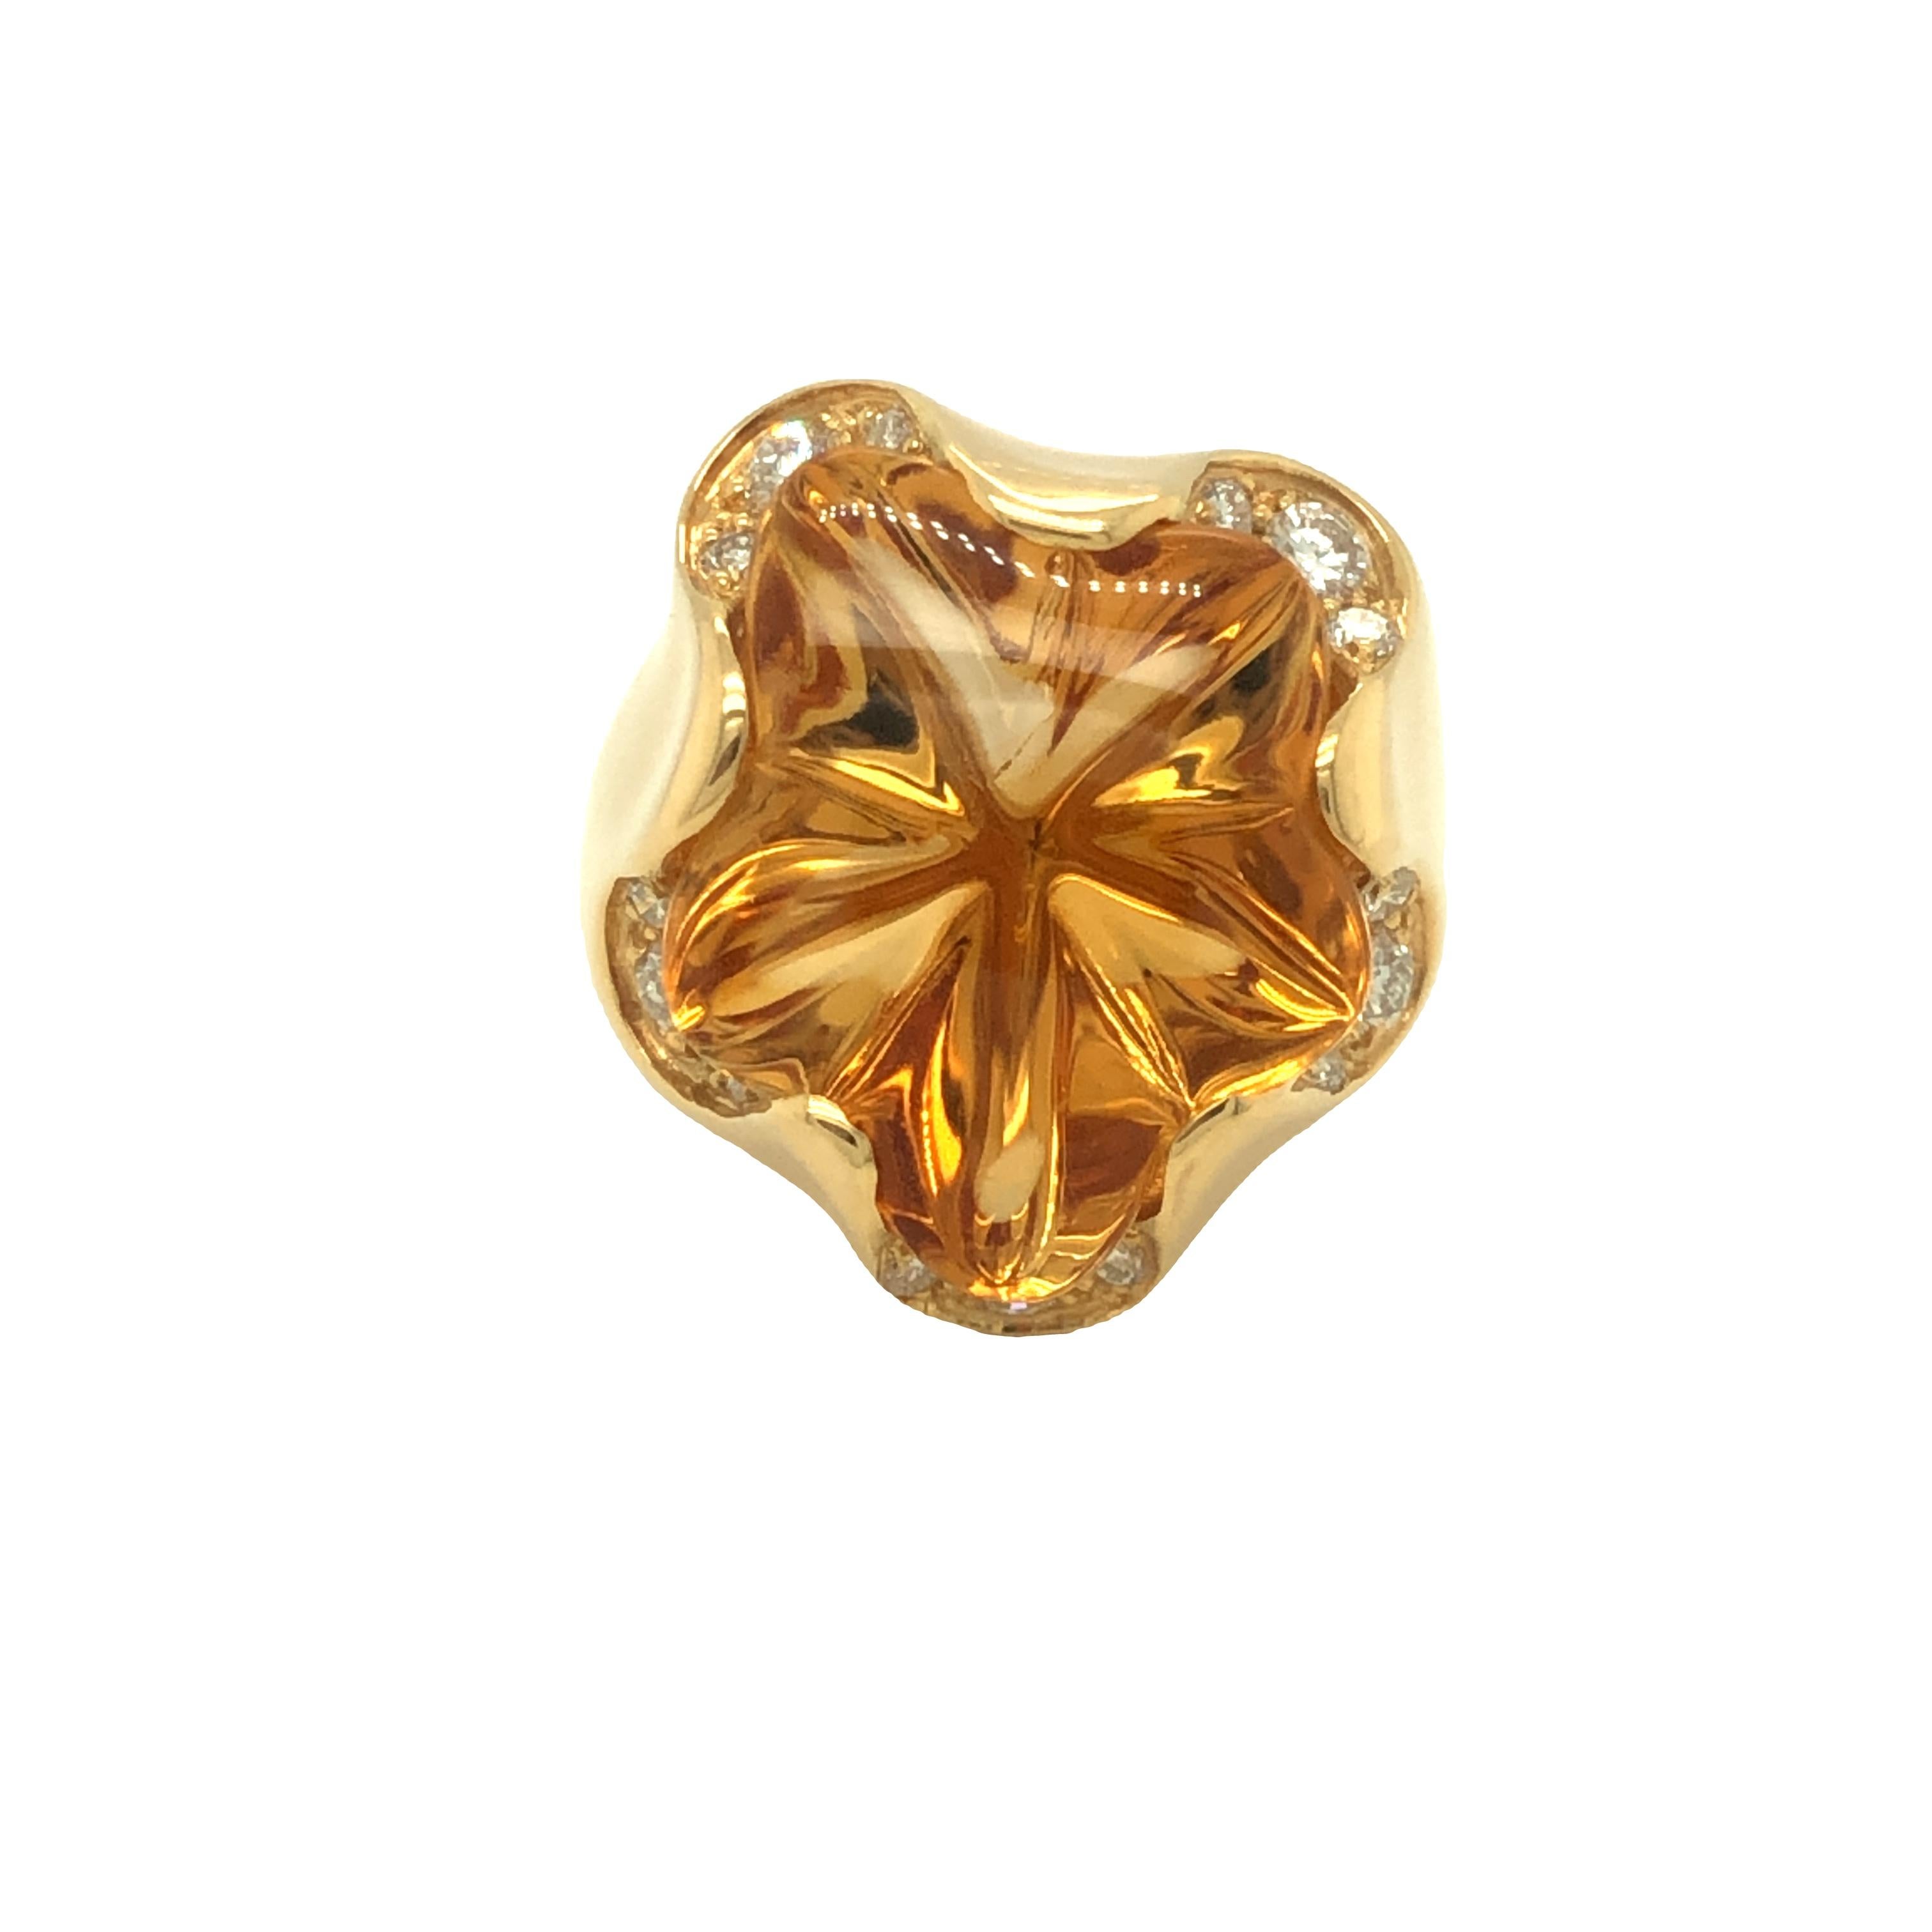 From our estate collection,  this artfully carved free-formed star shaped Citrine is beautifully set in handcrafted 18k yellow gold with colorless round brilliant diamonds on each points. The citrine has vivid golden yellow color. The ring is in